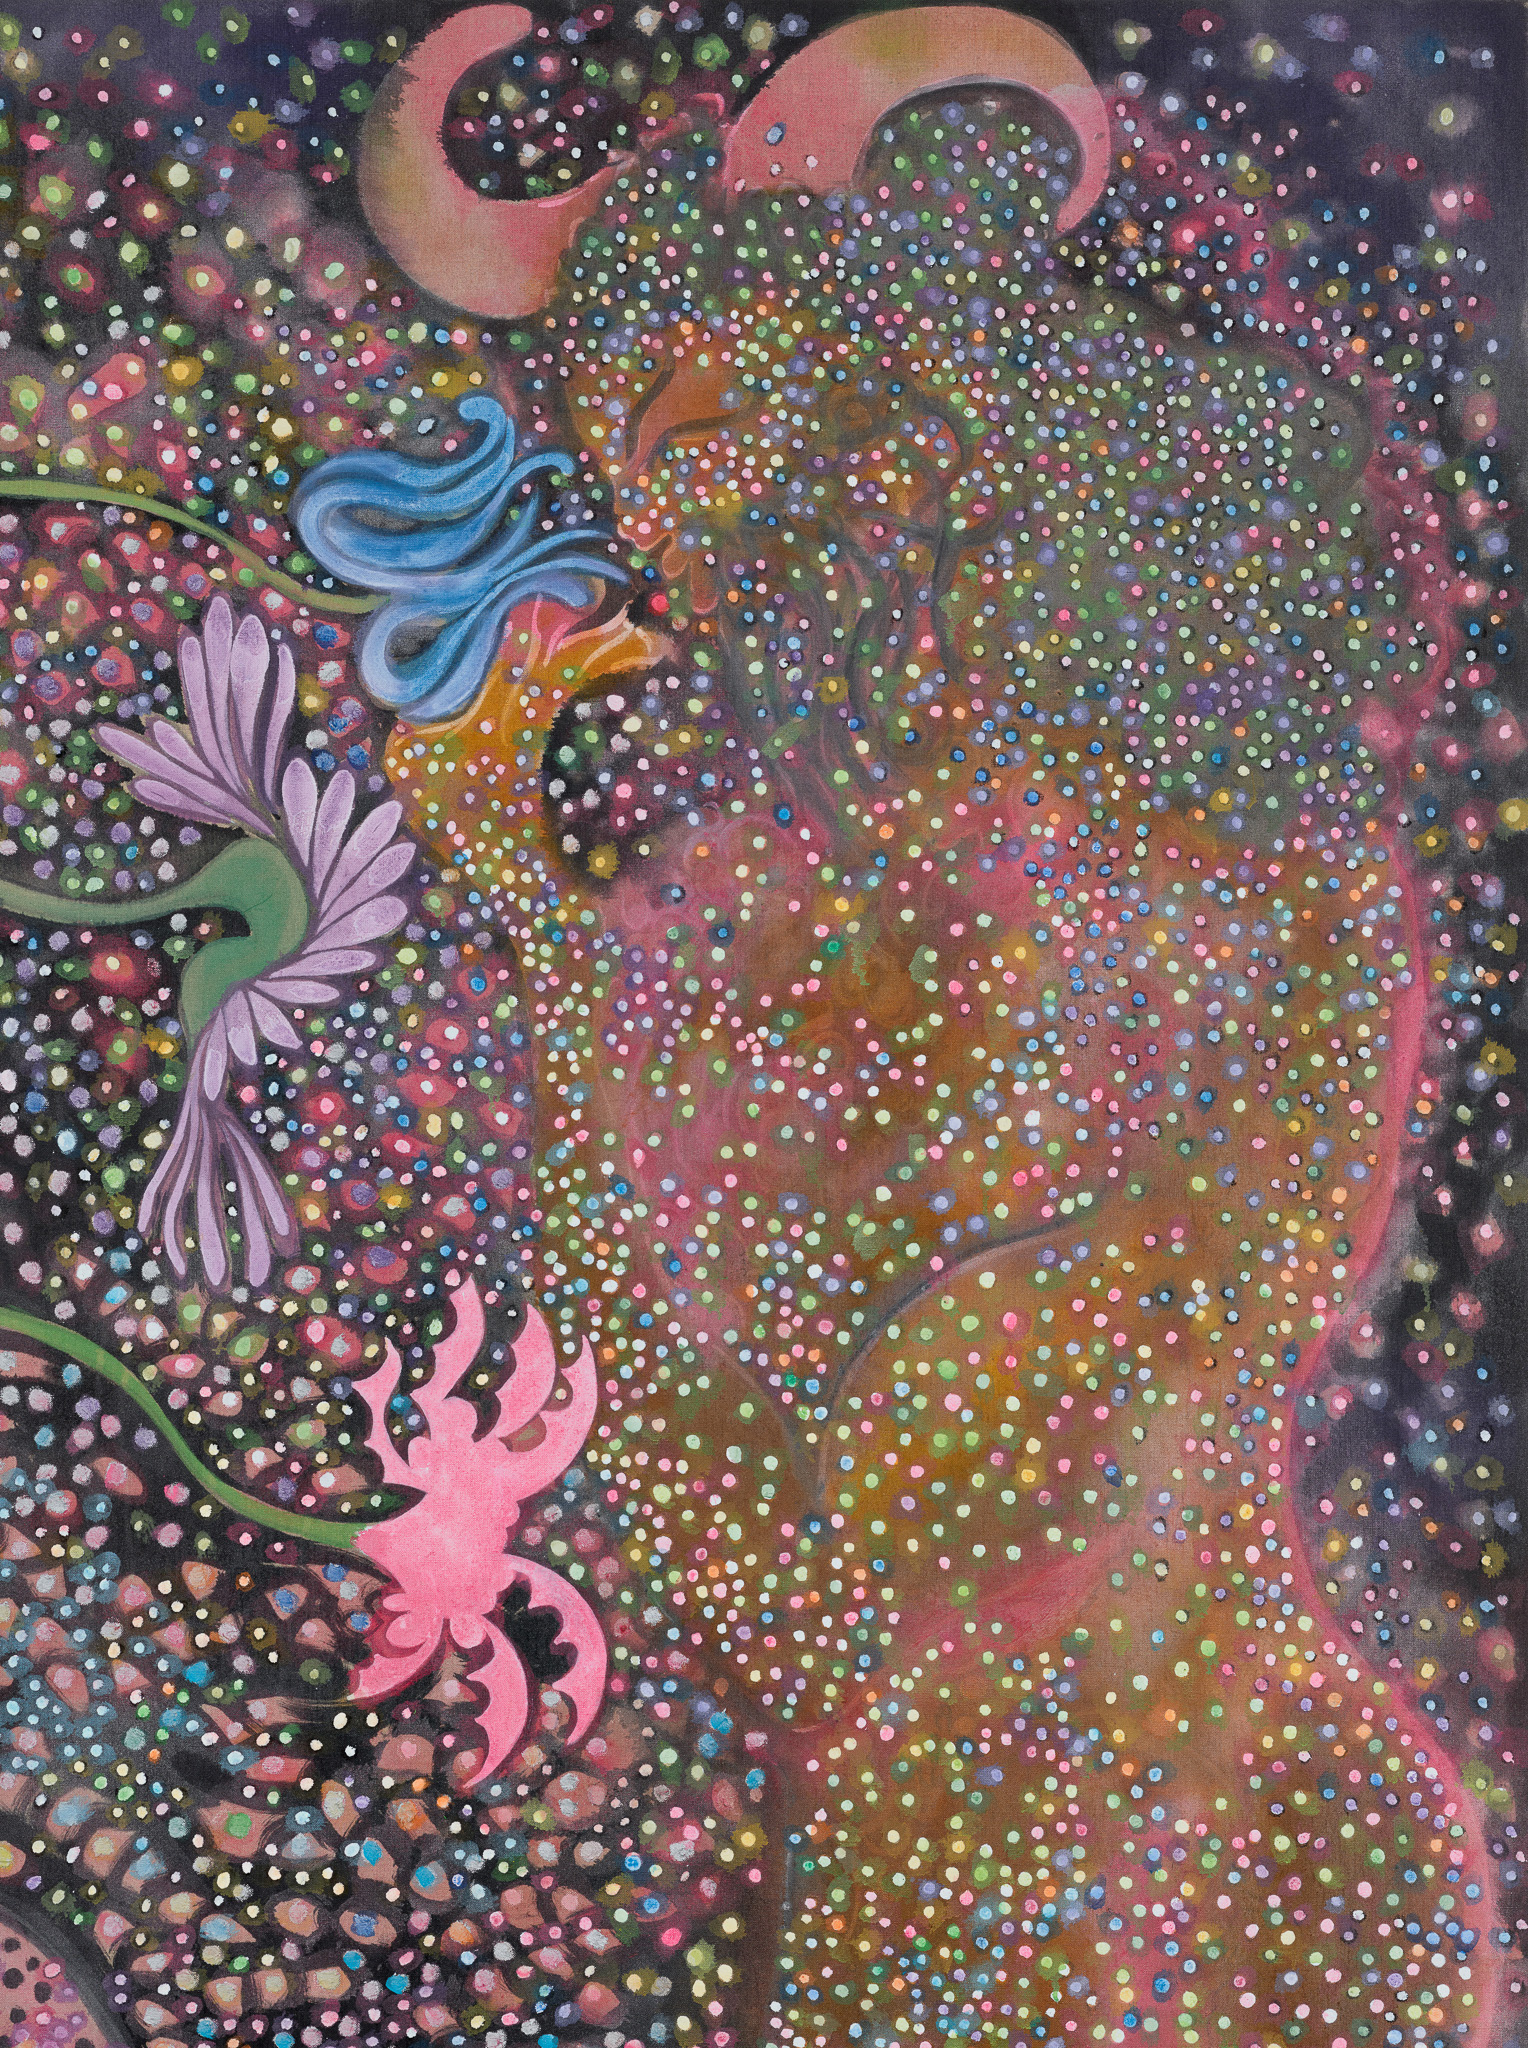 The Wick - Viewing Chris Ofili: The Seven Deadly Sins